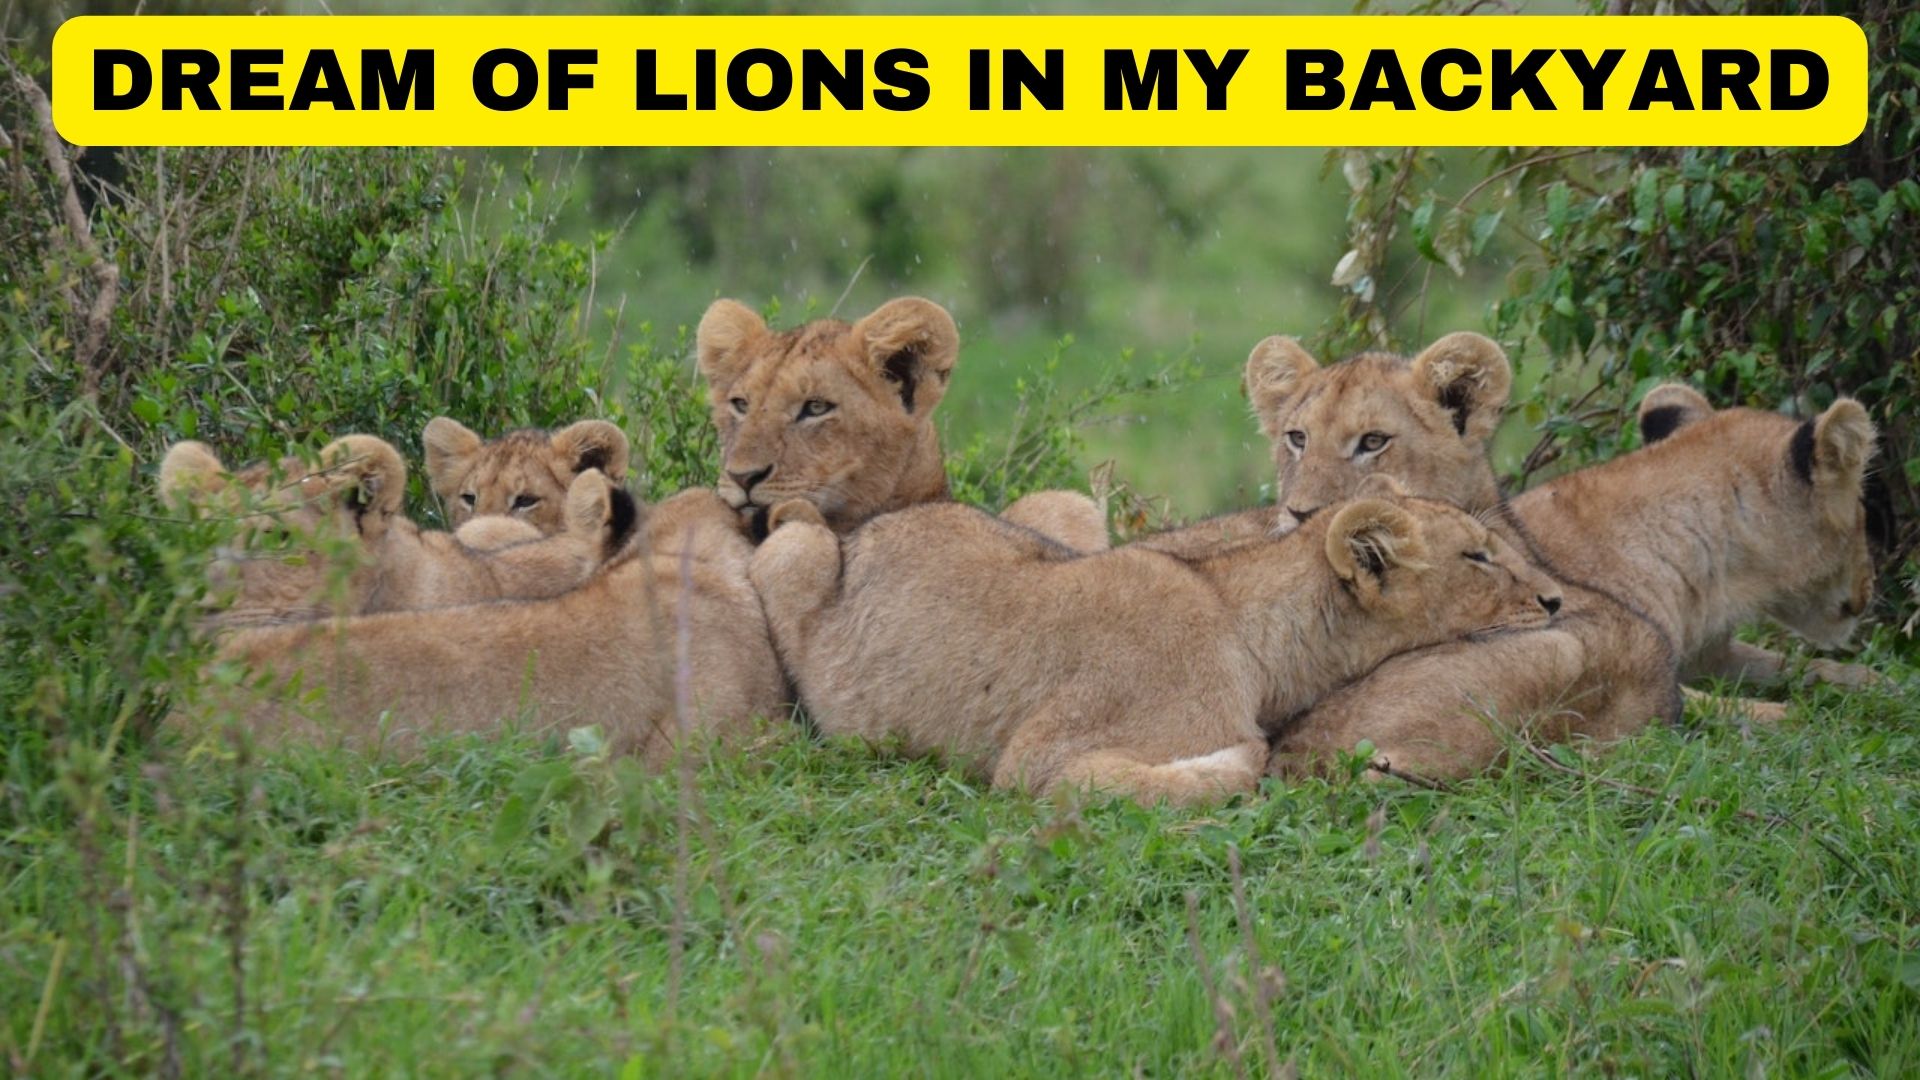 Dream Of Lions In My Backyard - A Symbol For Awareness